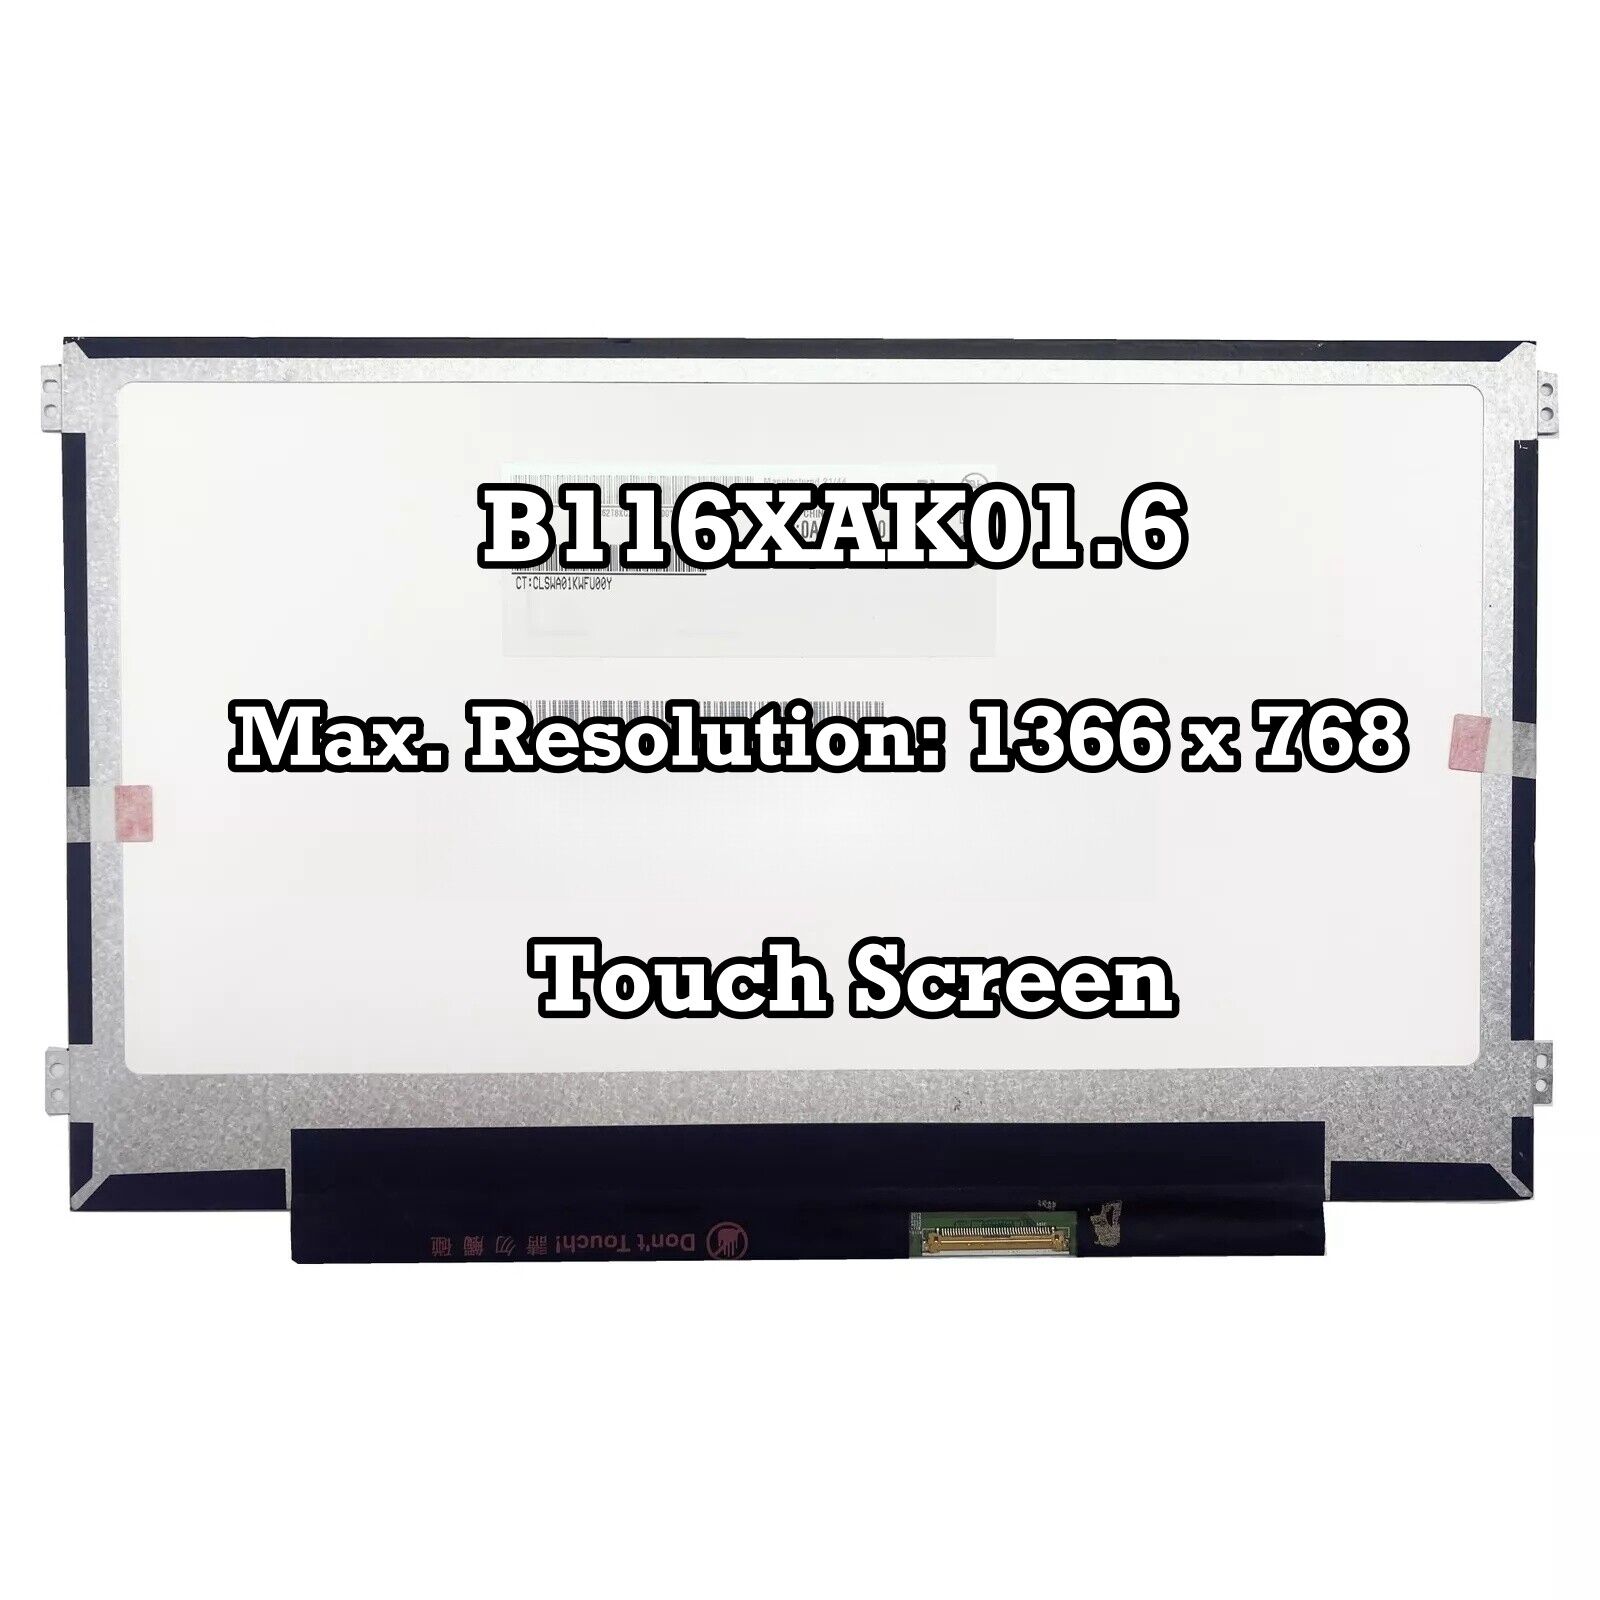 B116XAK01.6 HD 1366 * 768 11.6'' 40pins New LCD LED Touch Screen Replacement